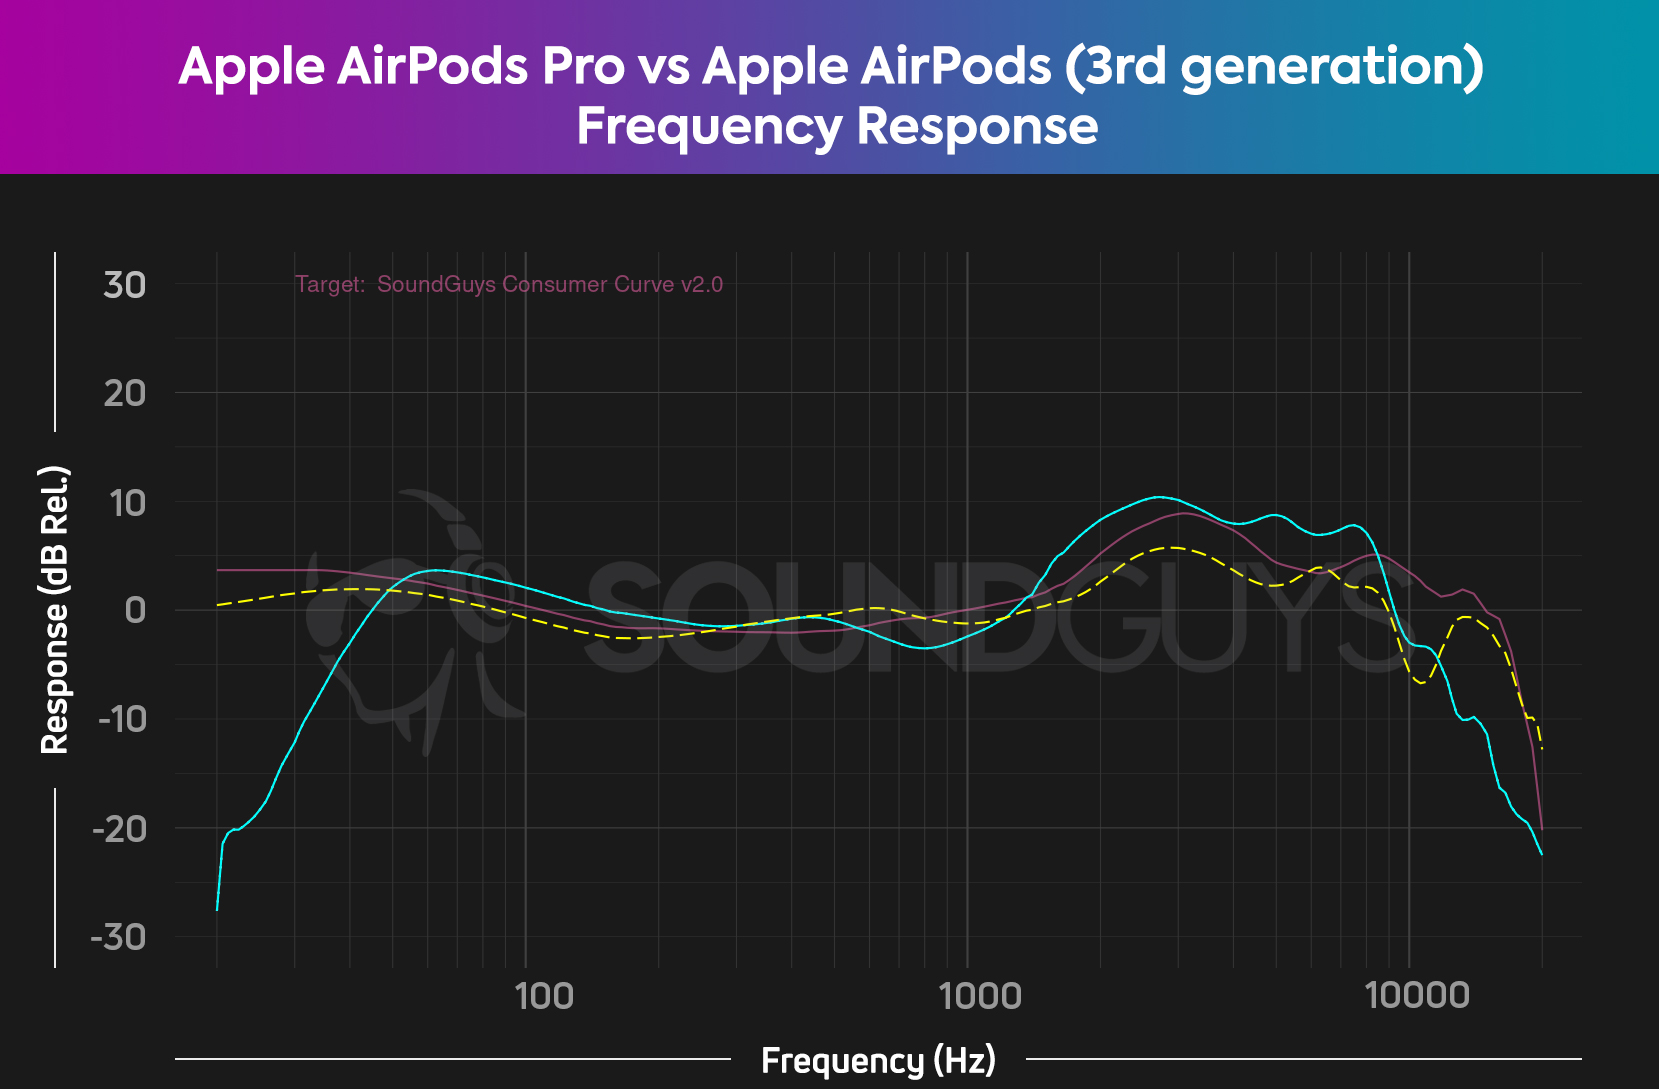 A comparison chart between the Apple AirPods Pro and the Apple AirPods (3rd generation)